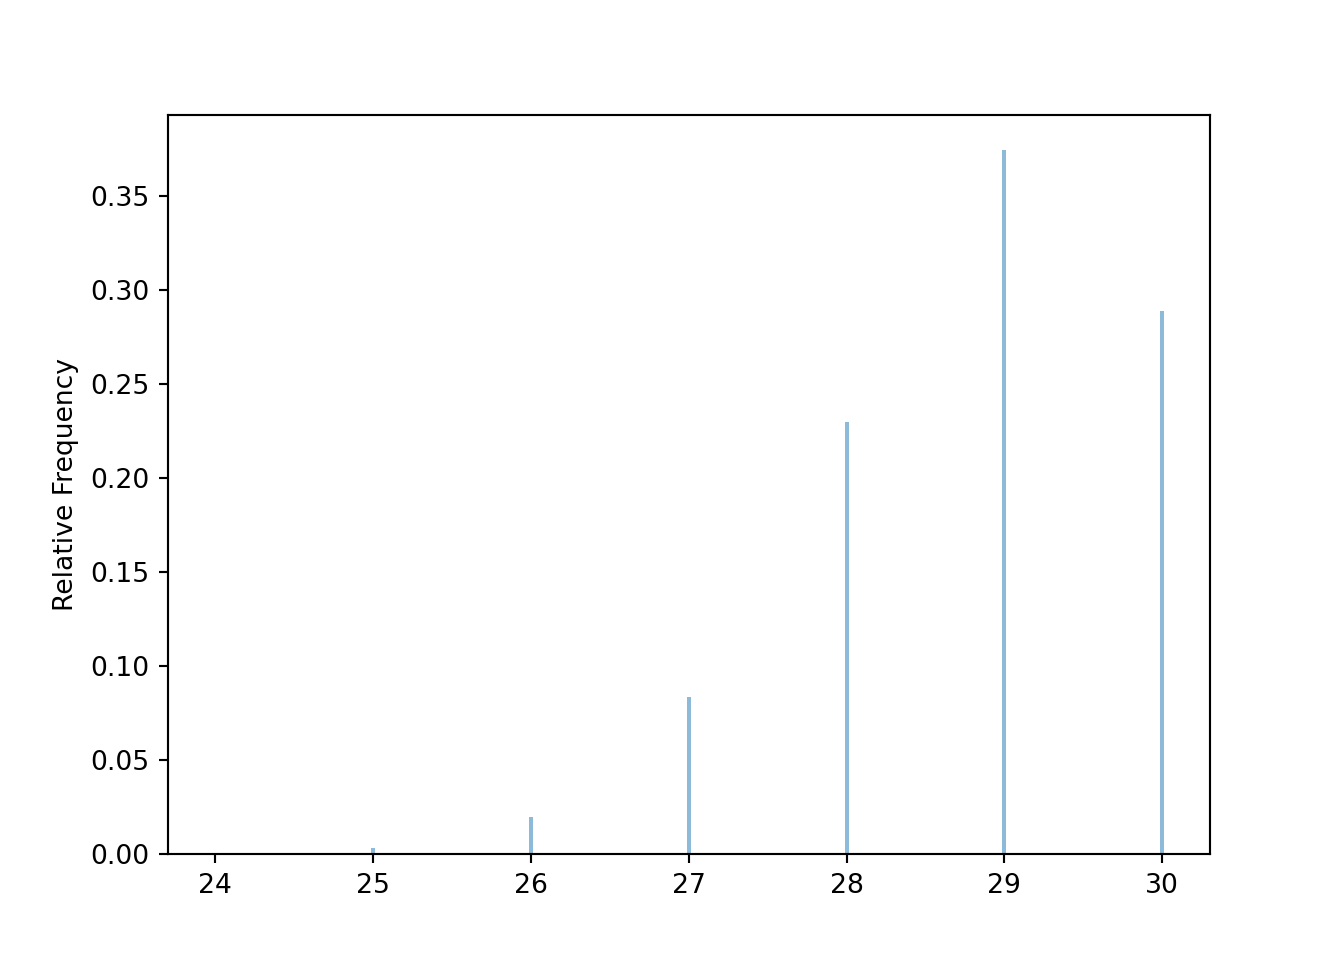 Simulation of the birthday problem for \(n=30\). The plot displays the simulated distribution of the number of distinct birthdays among the 30 people. There are no birthday matches only when there are 30 distinct birthdays among the 30 people, which happens with probability about 0.3.